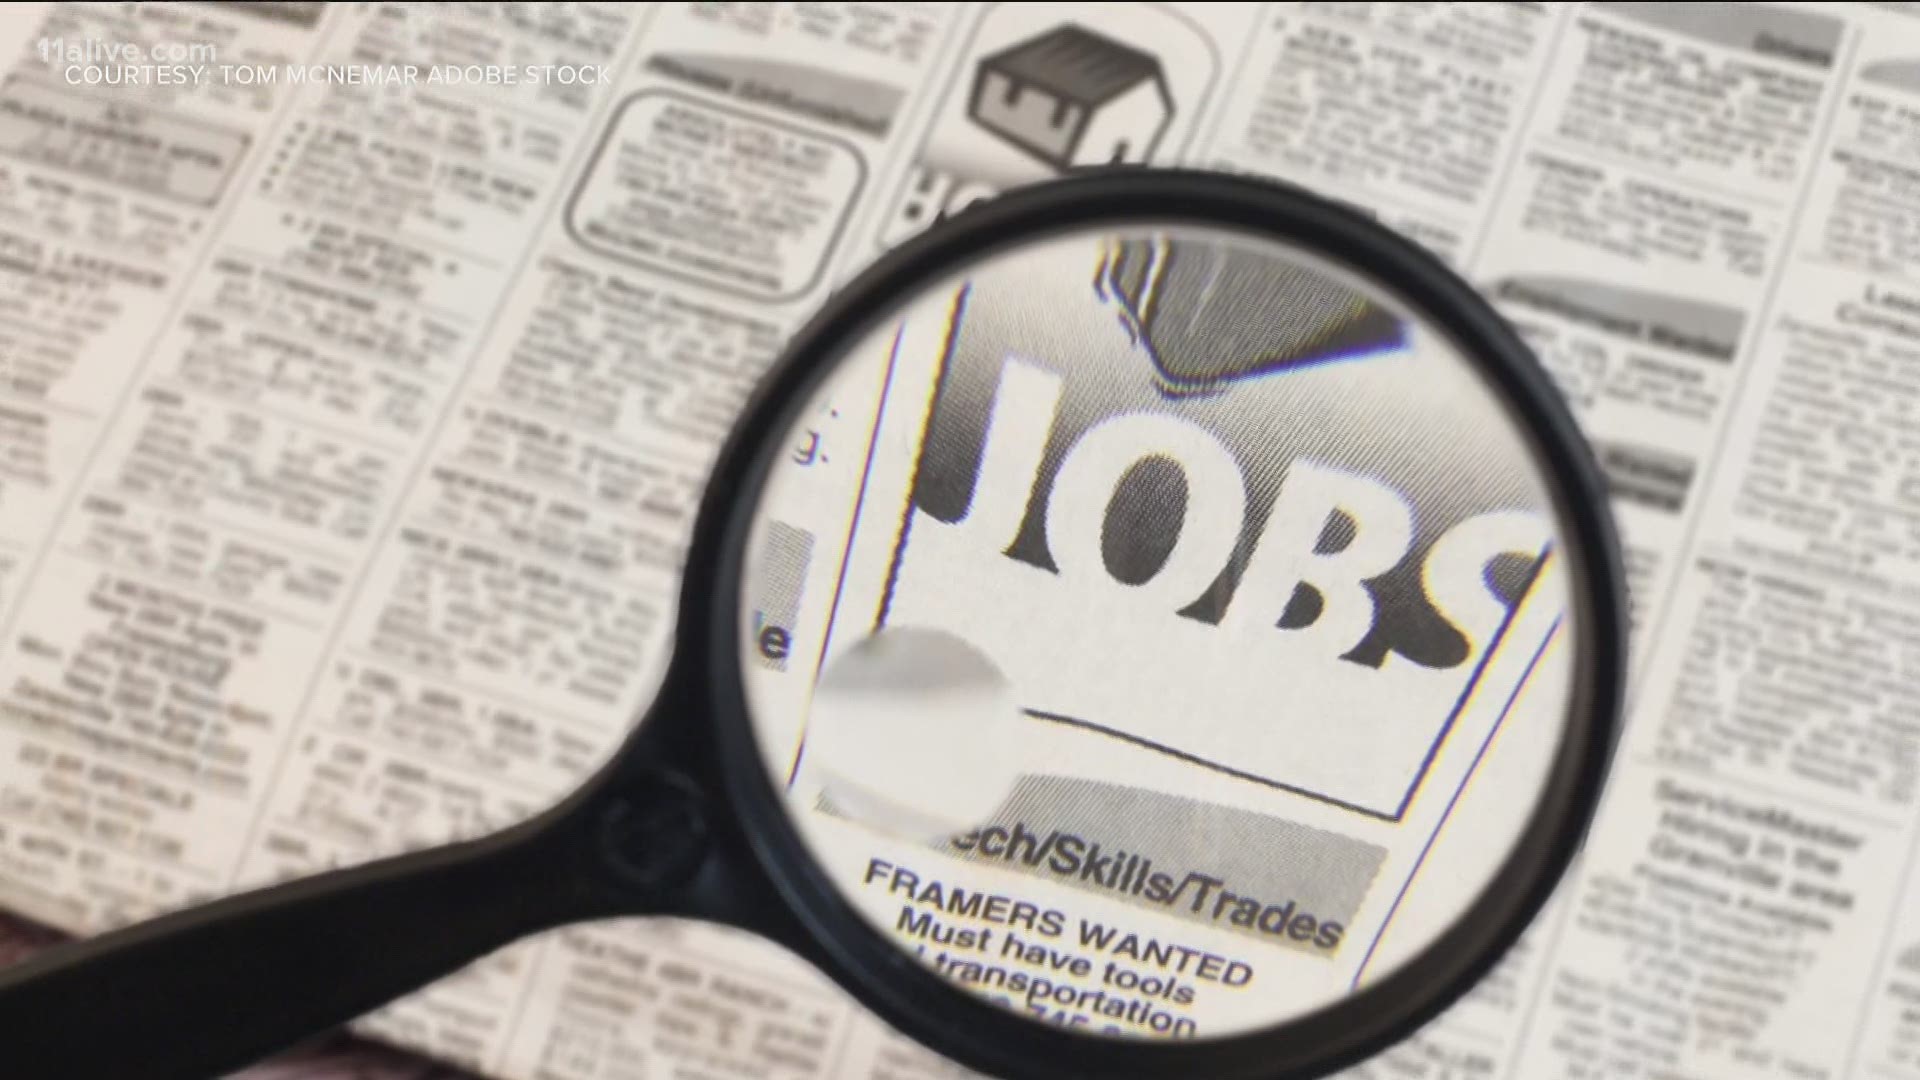 The job market is bouncing back and experts are tracking which companies are staffing up.